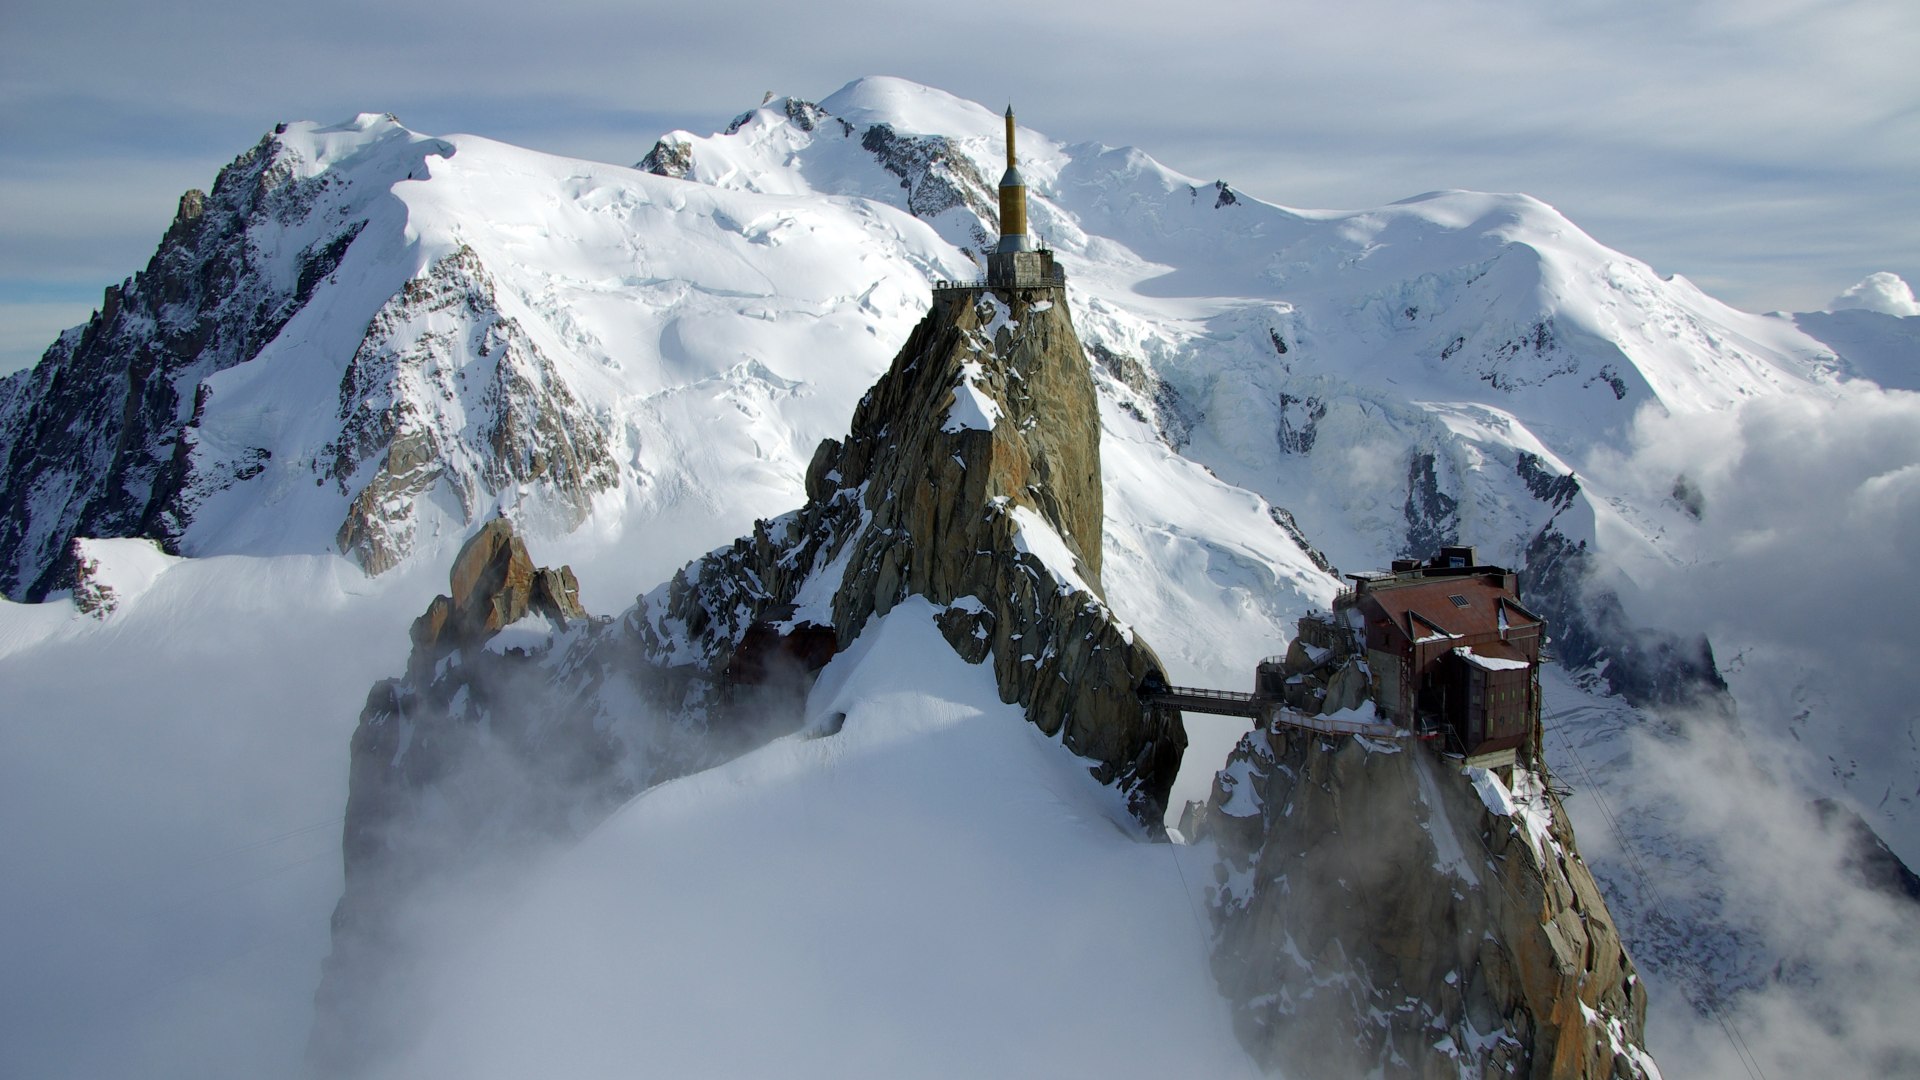 Snow-covered Mont Blanc with the Aiguille du Midi cable car station in the foreground